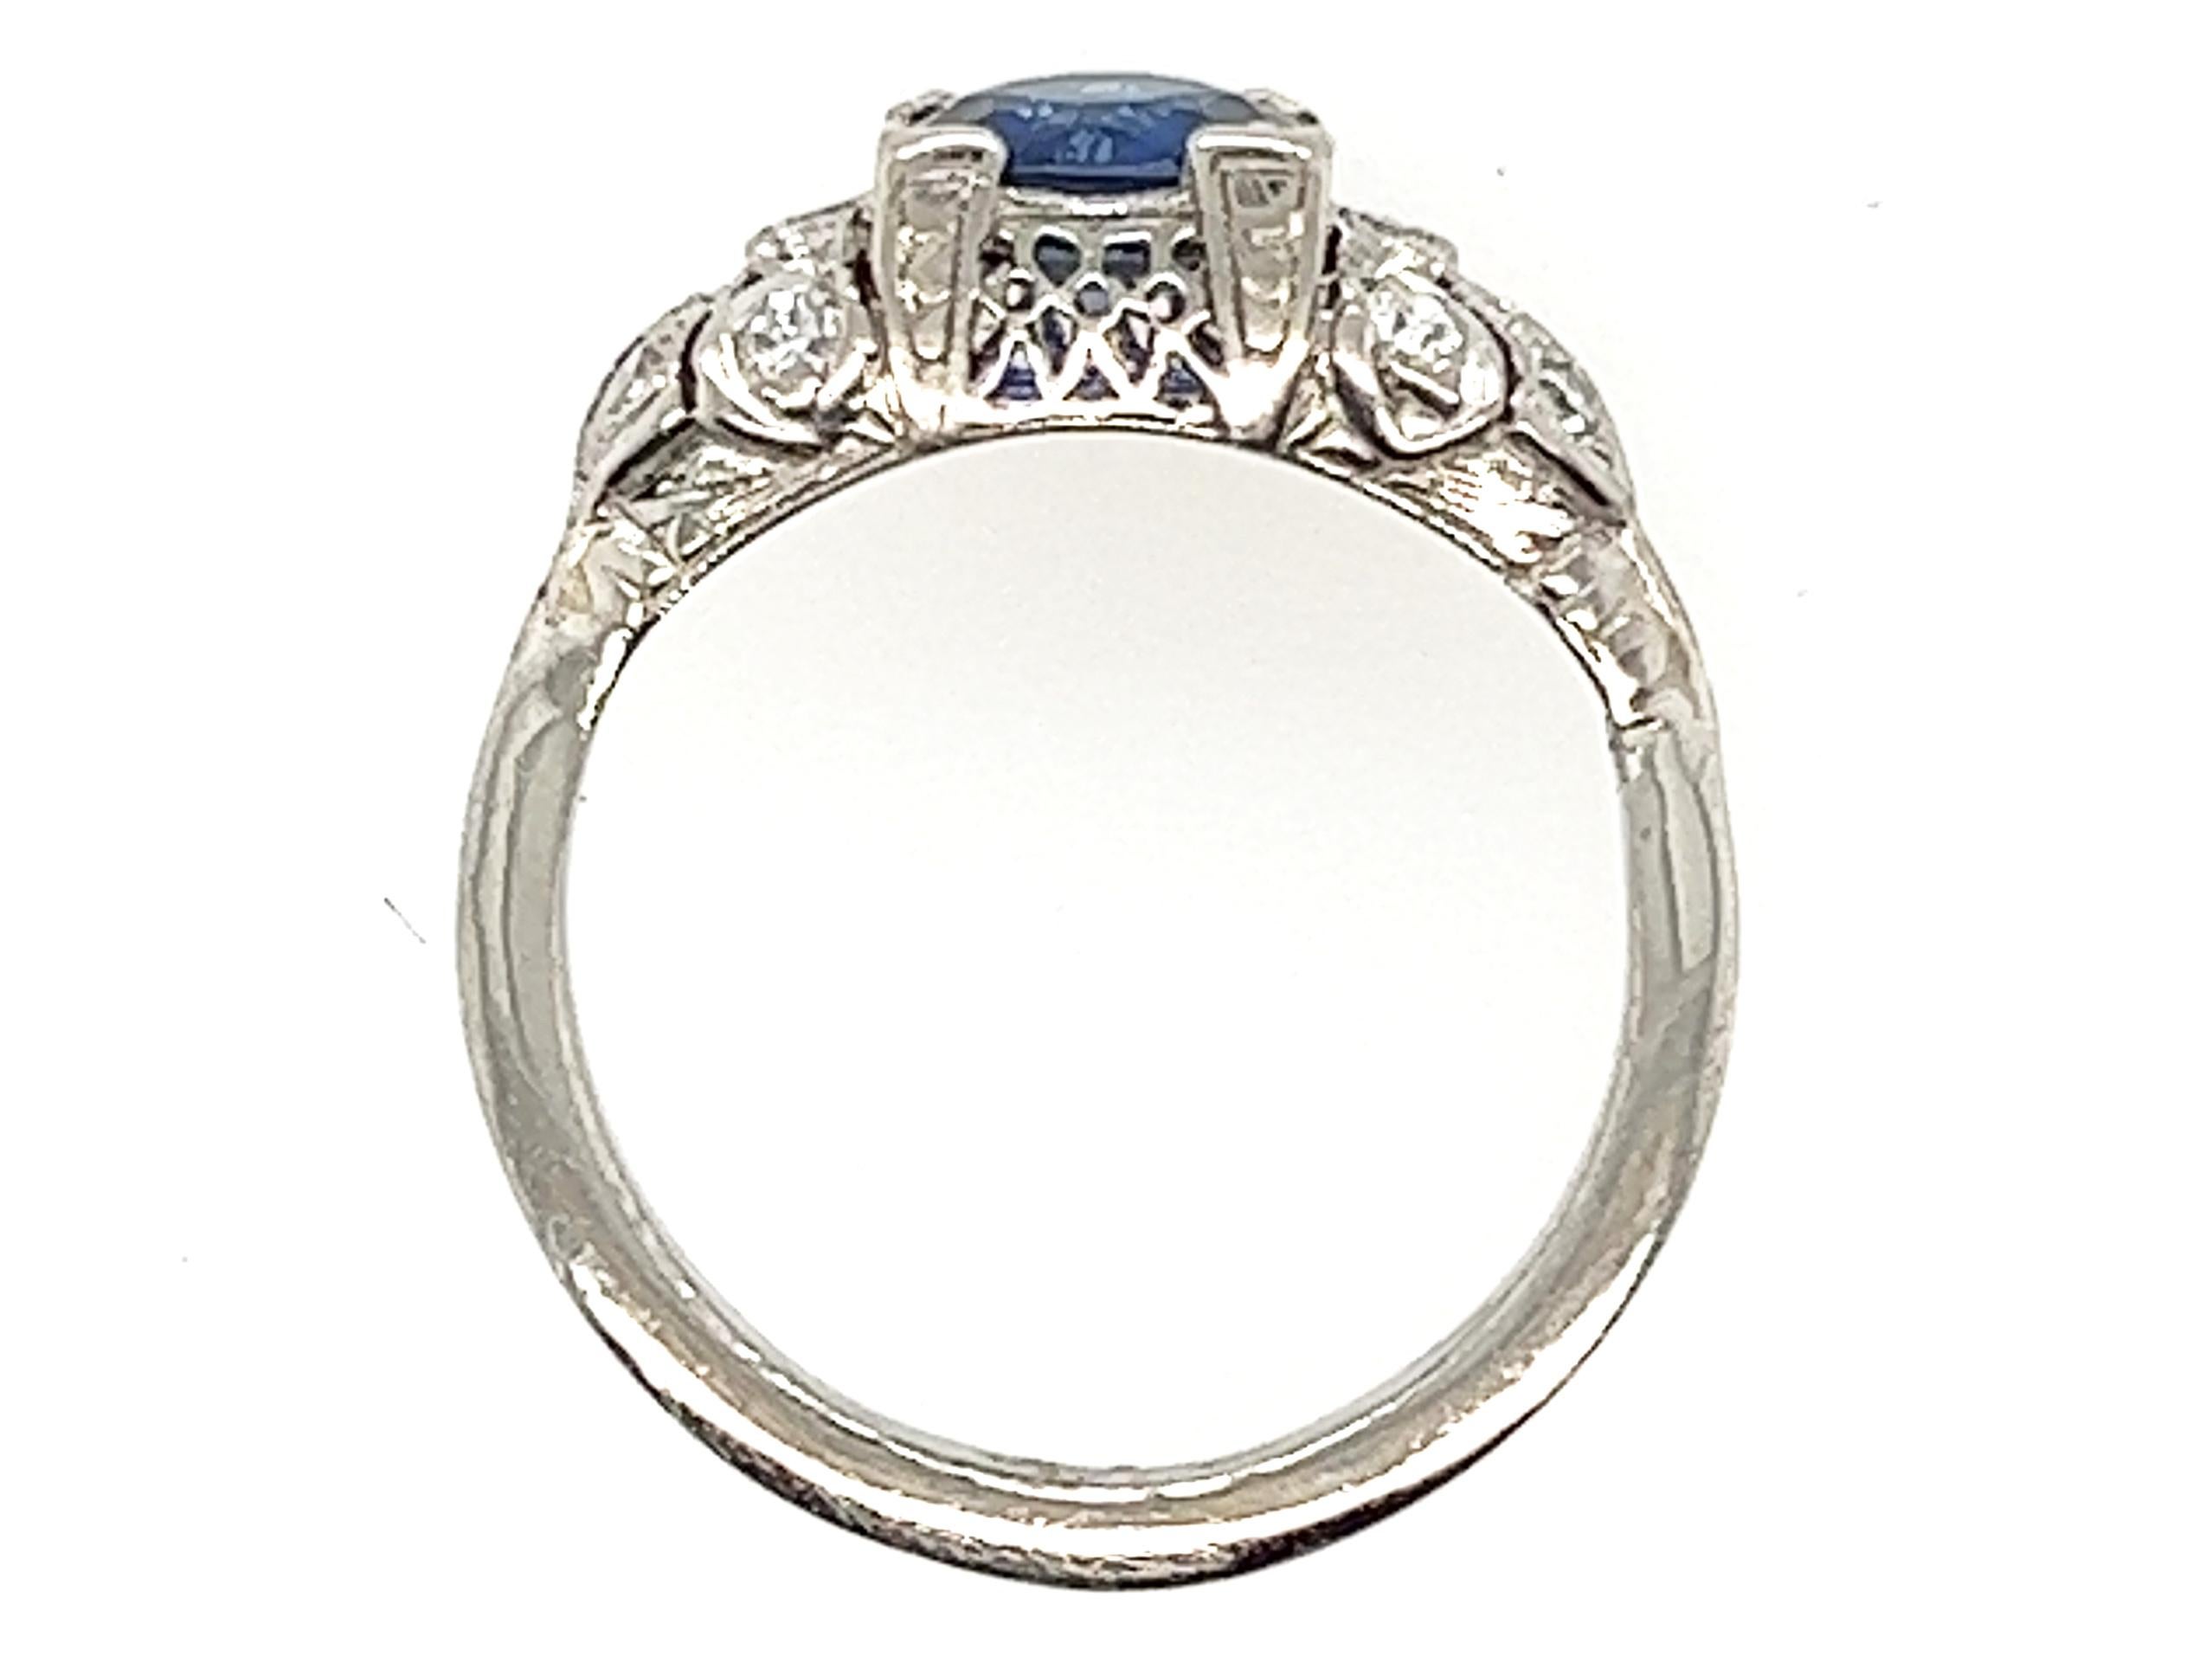 Genuine Original Art Deco Antique from 1920's Vintage Sapphire Diamond Ring 1.25ct Round Platinum


Featuring a Beautiful Blue 1.05ct Genuine Natural Round Sapphire Center

Natural Mined Antique Single Cut and Old European Cut Side Diamonds